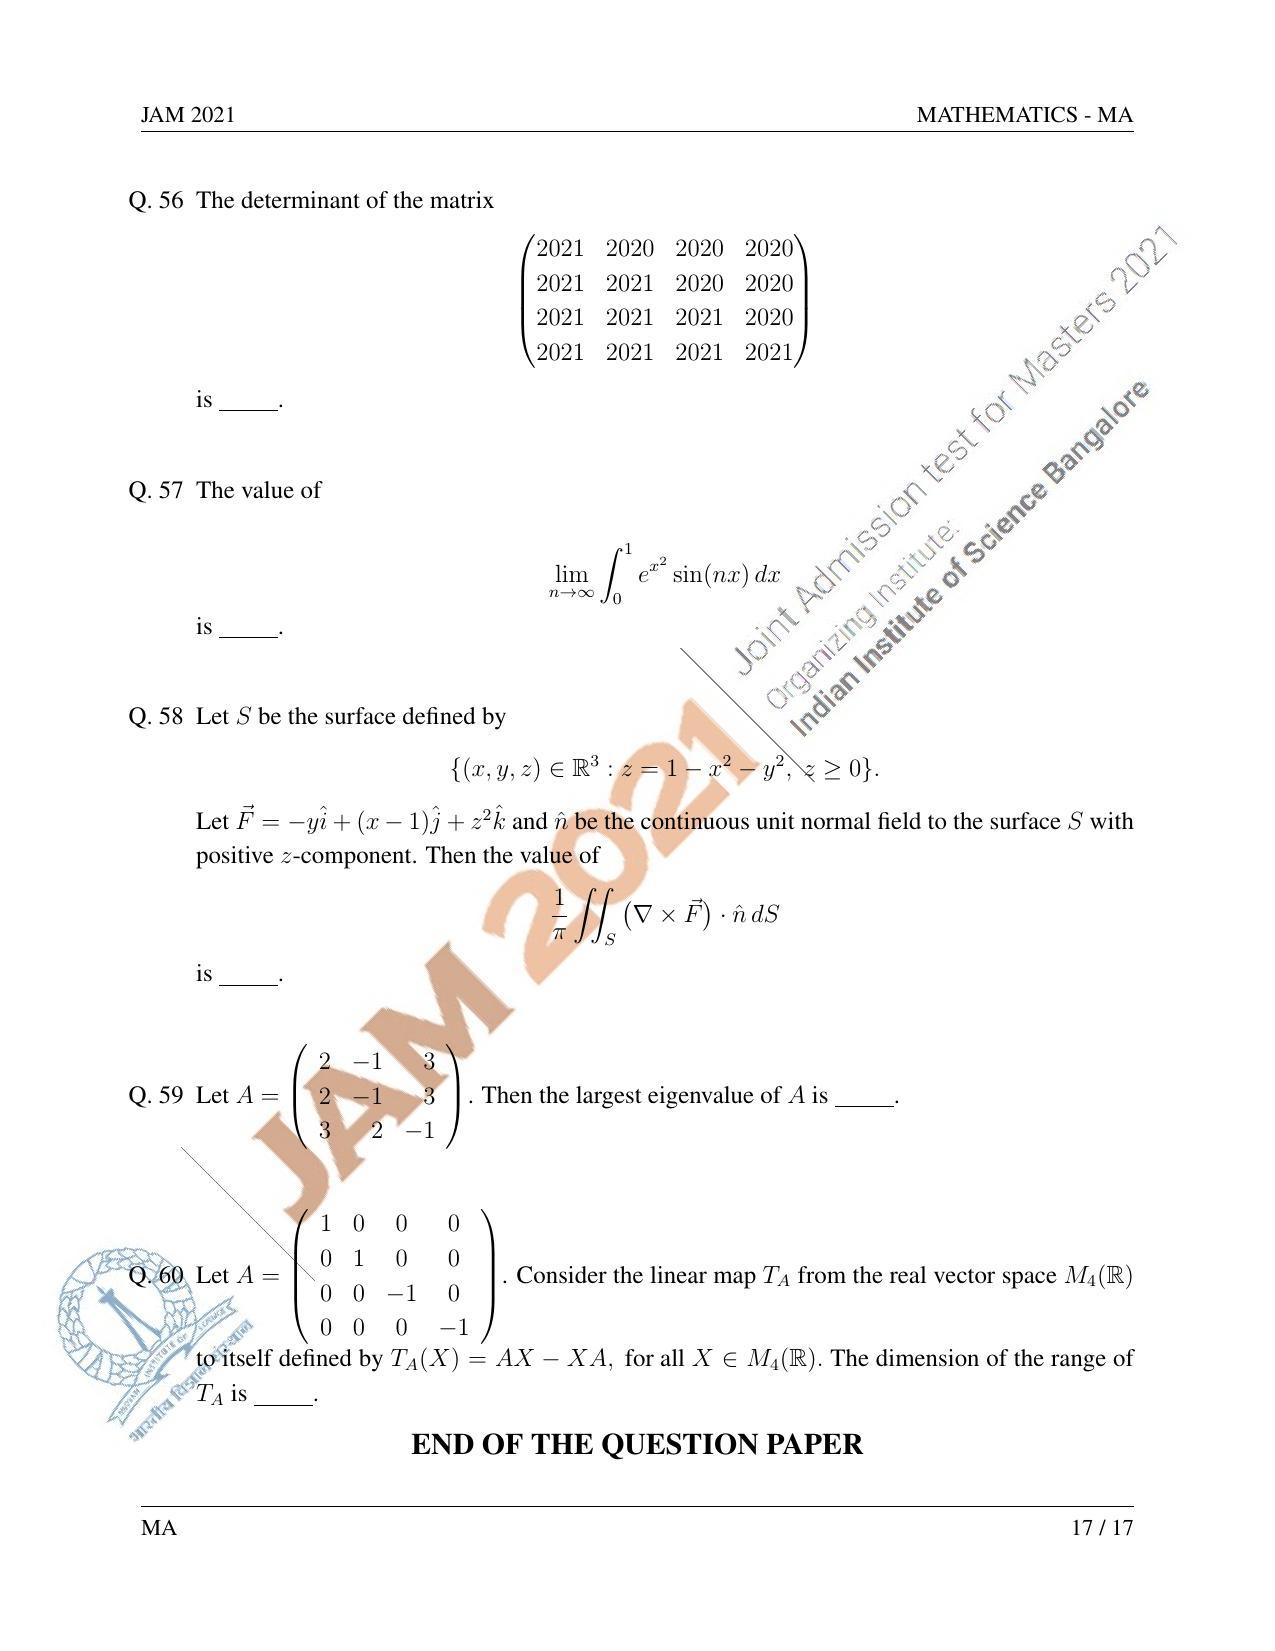 JAM 2021: MA Question Paper - Page 18